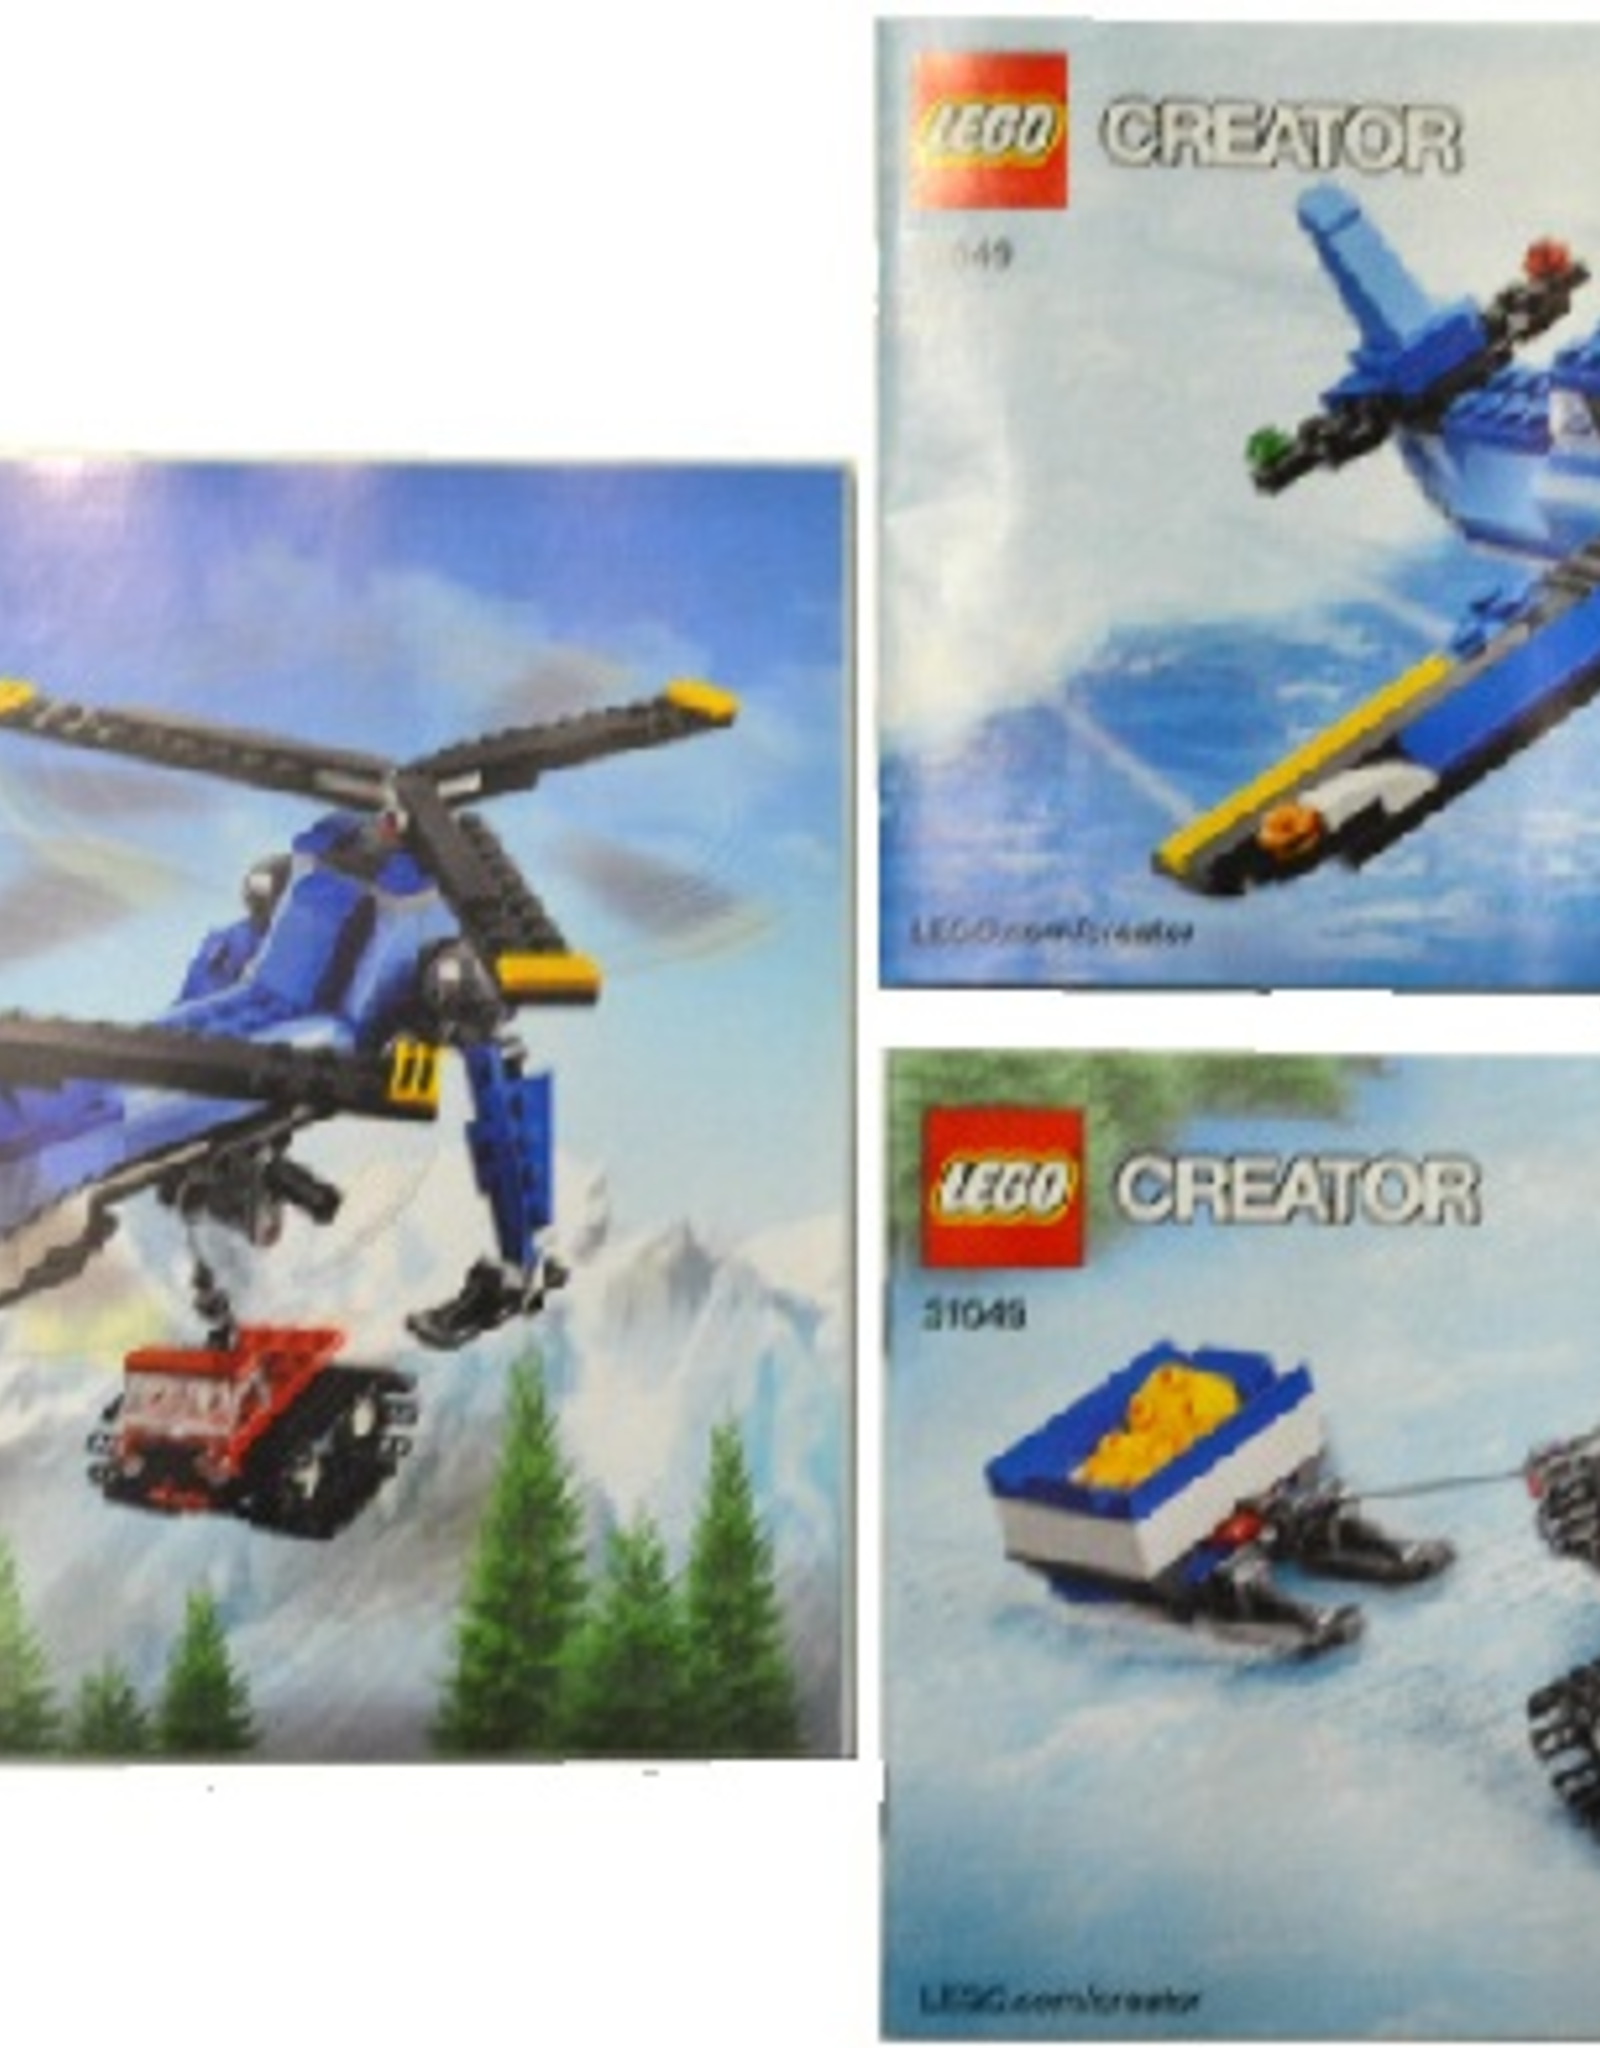 LEGO LEGO 31049  Twin Spin Helicopter CREATOR